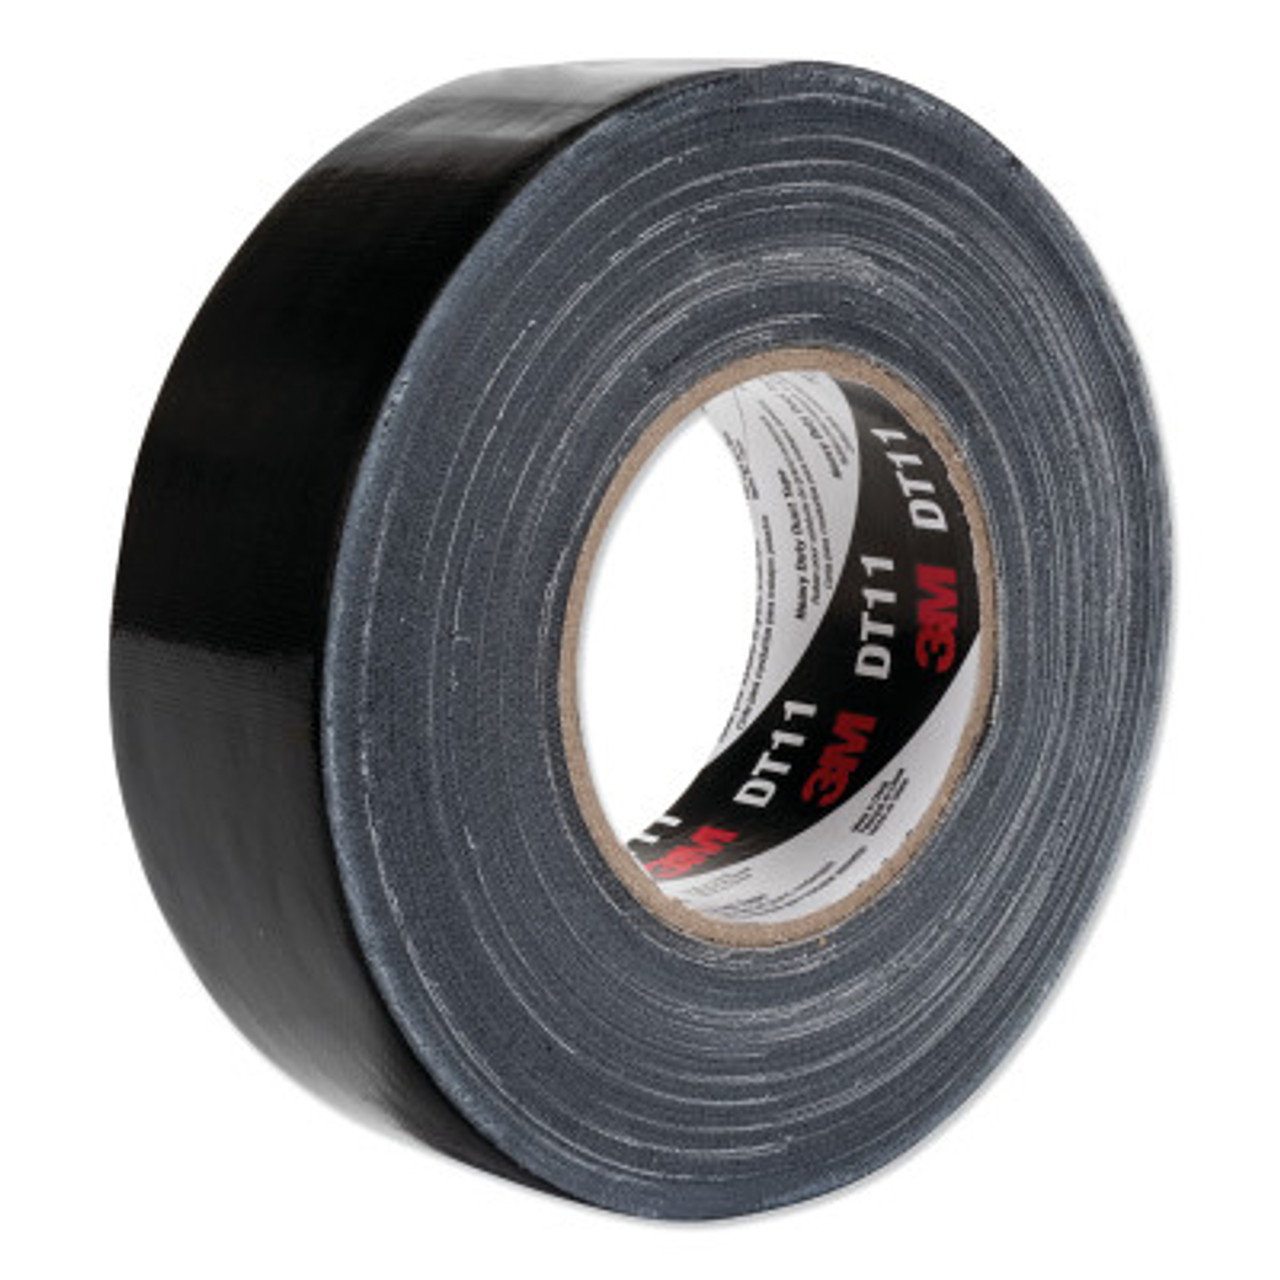 3M 3939 Duct Tape, Silver